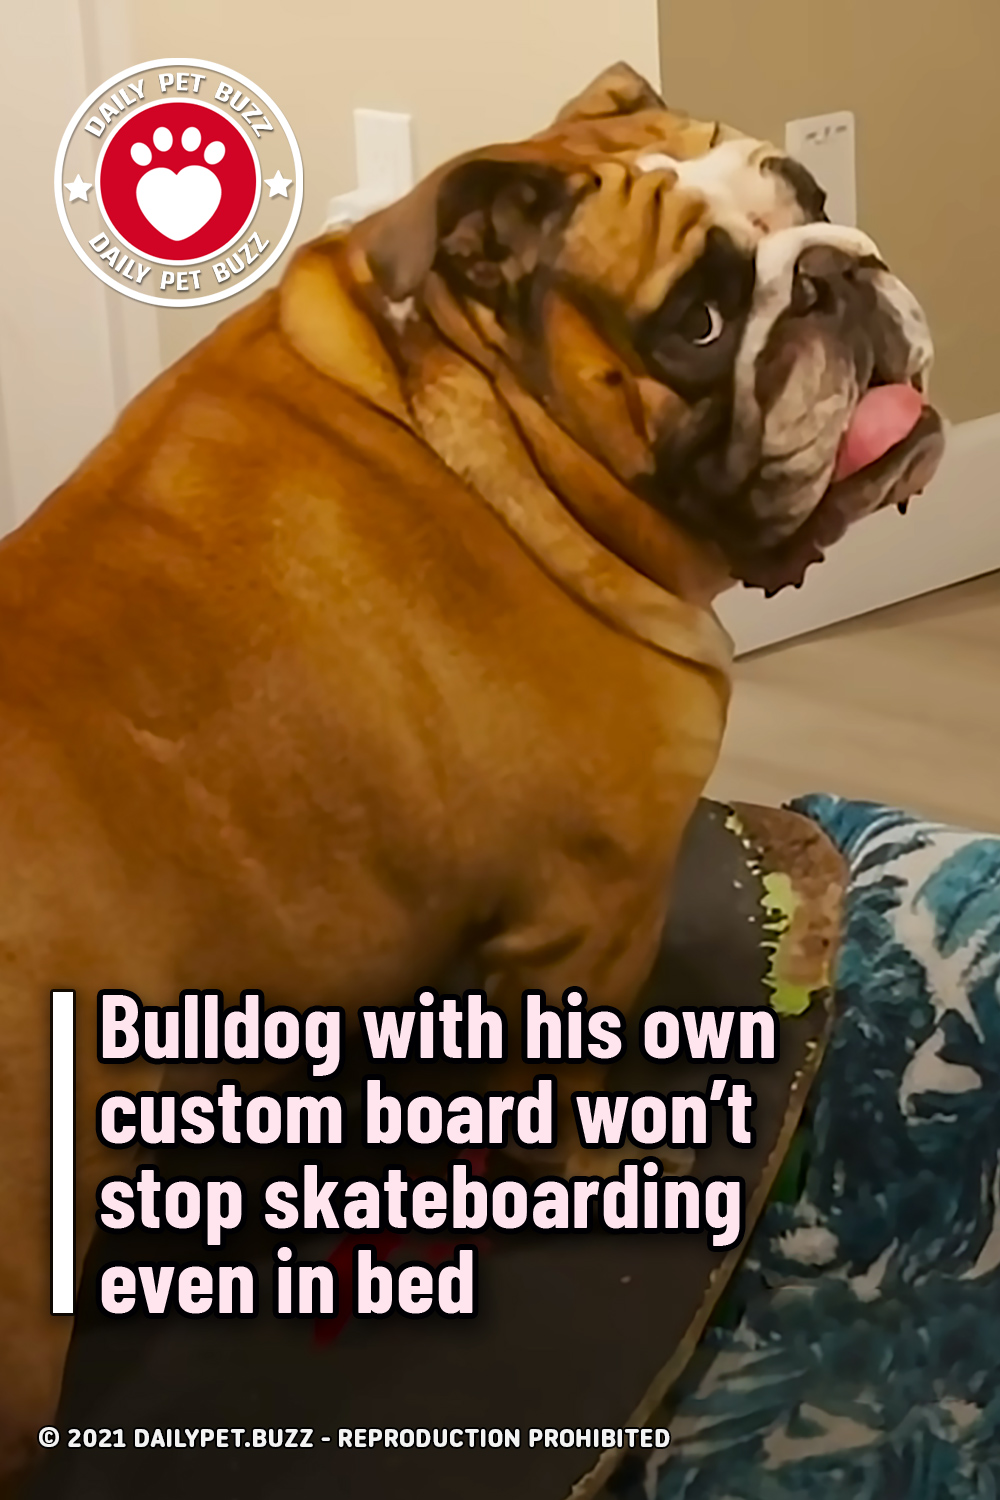 Bulldog with his own custom board won’t stop skateboarding even in bed